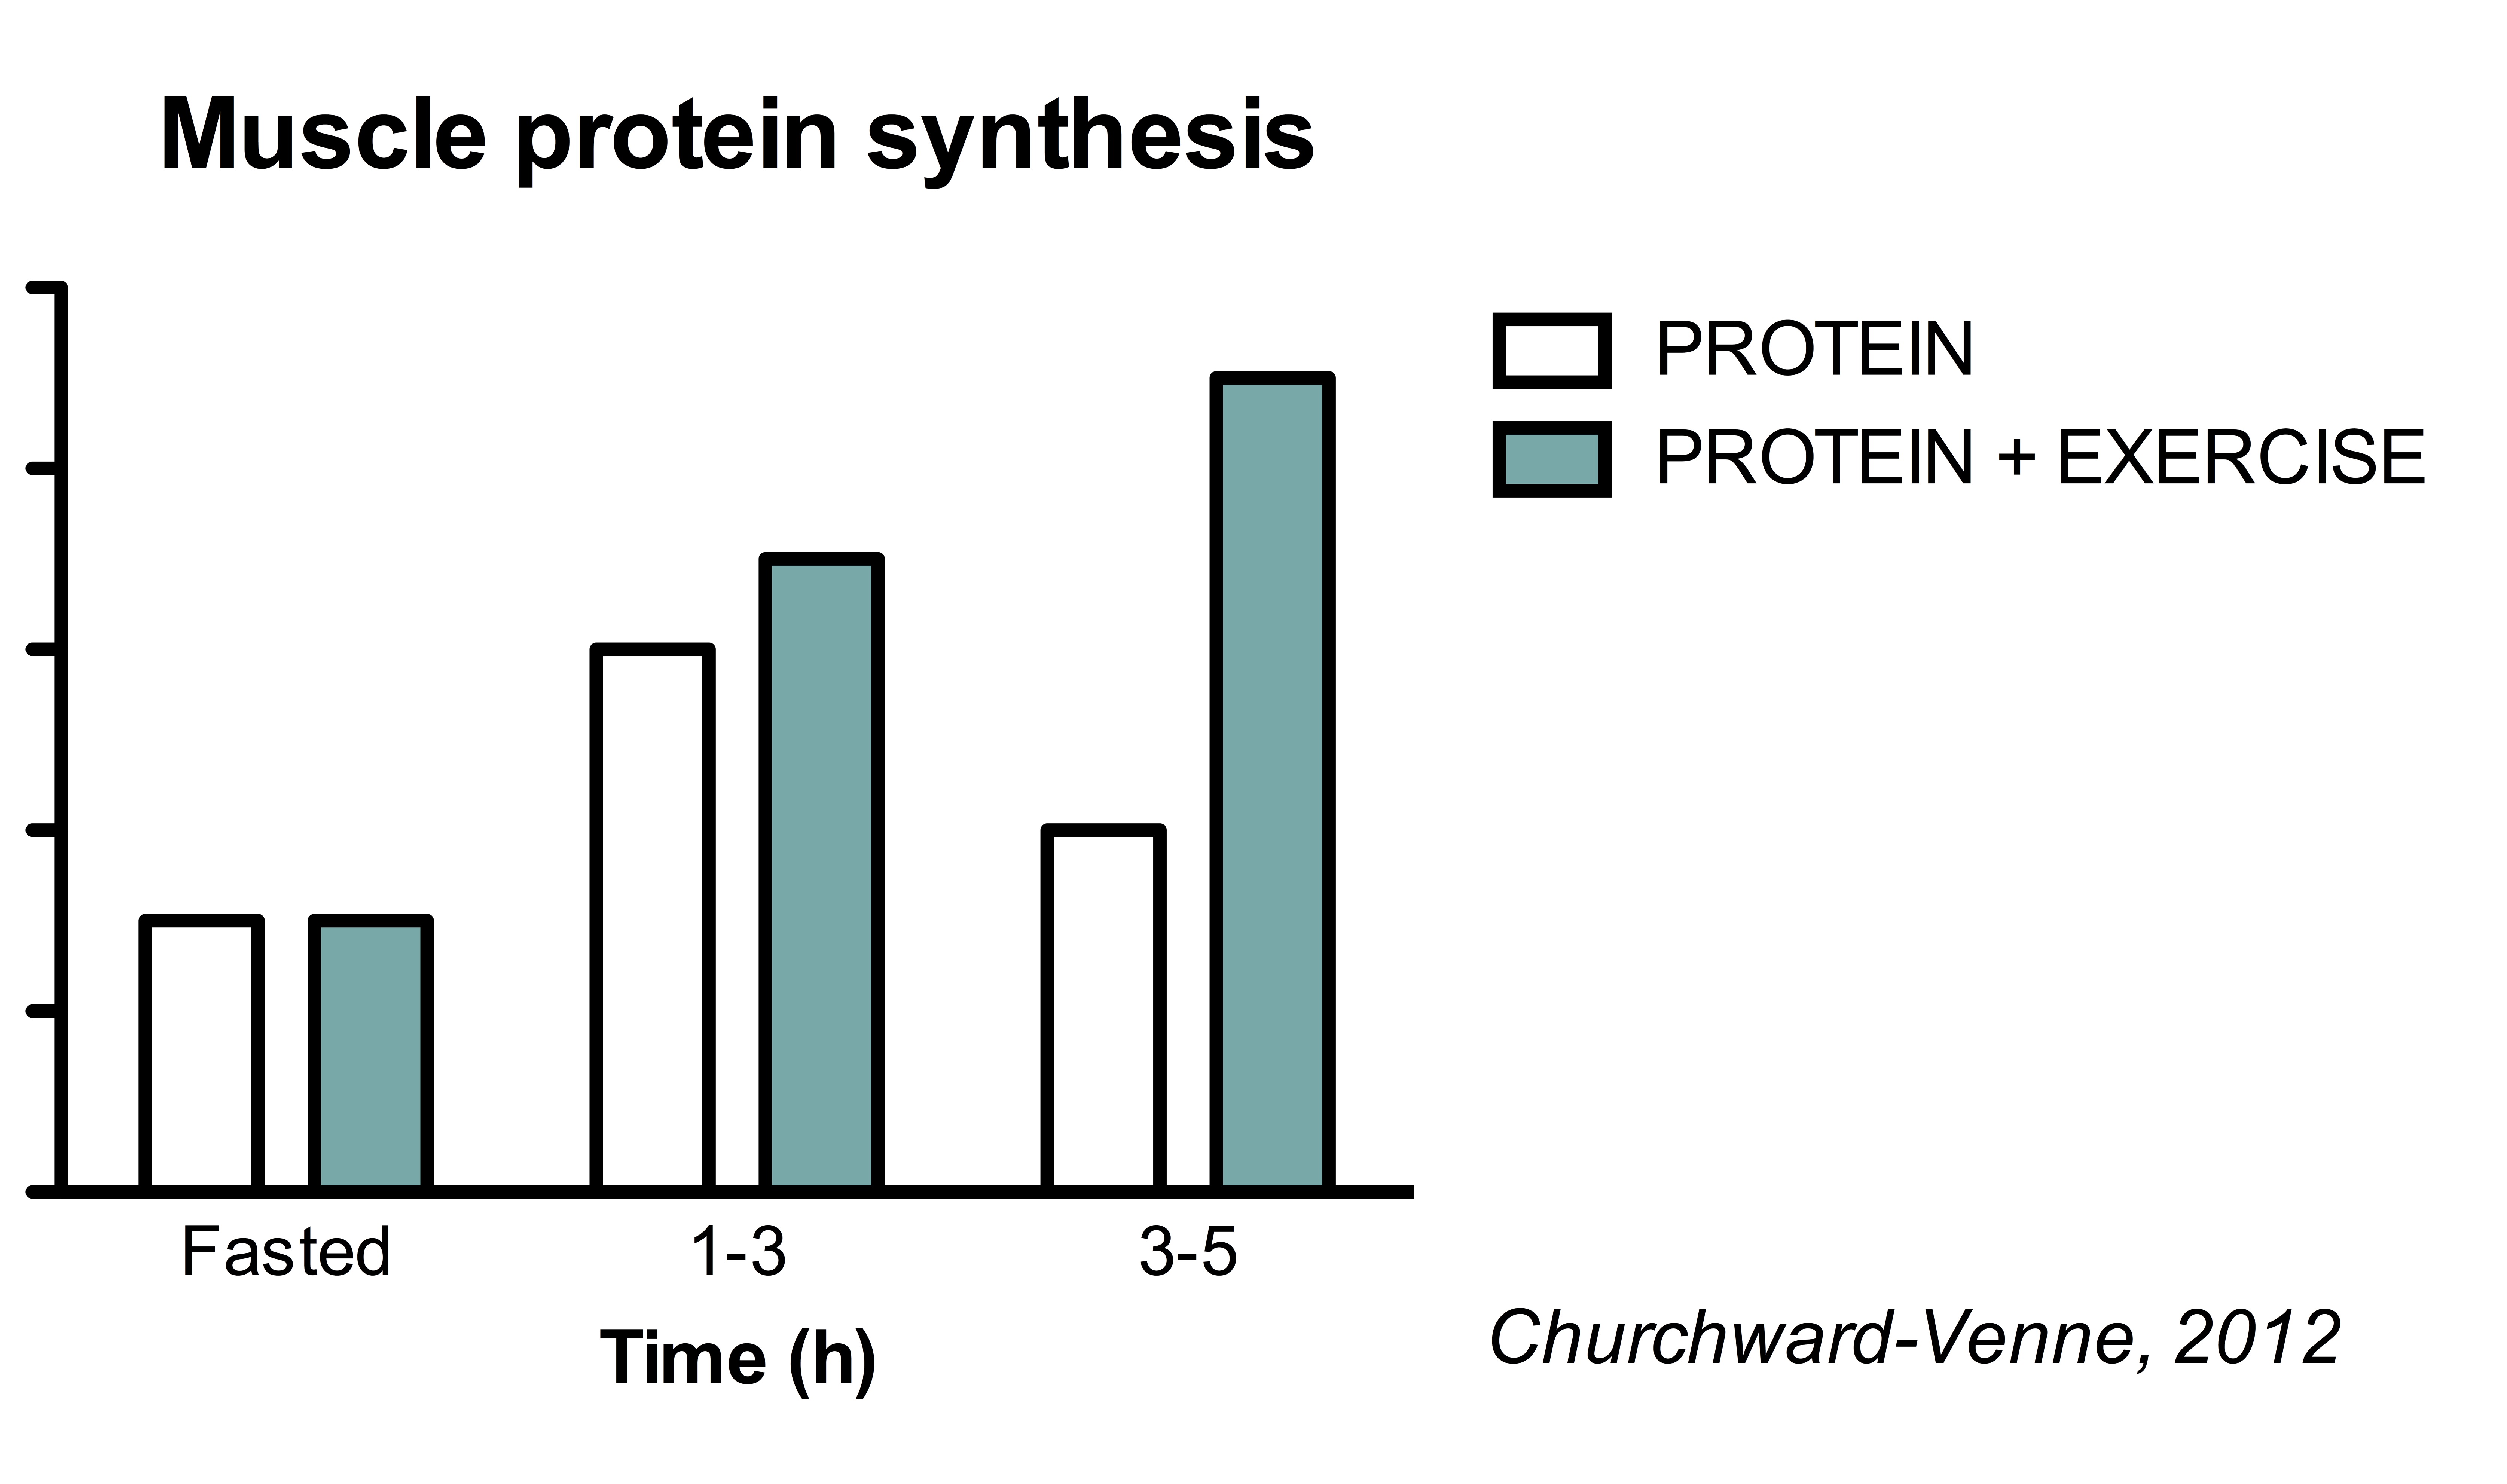 Protein synthesis post-exercise